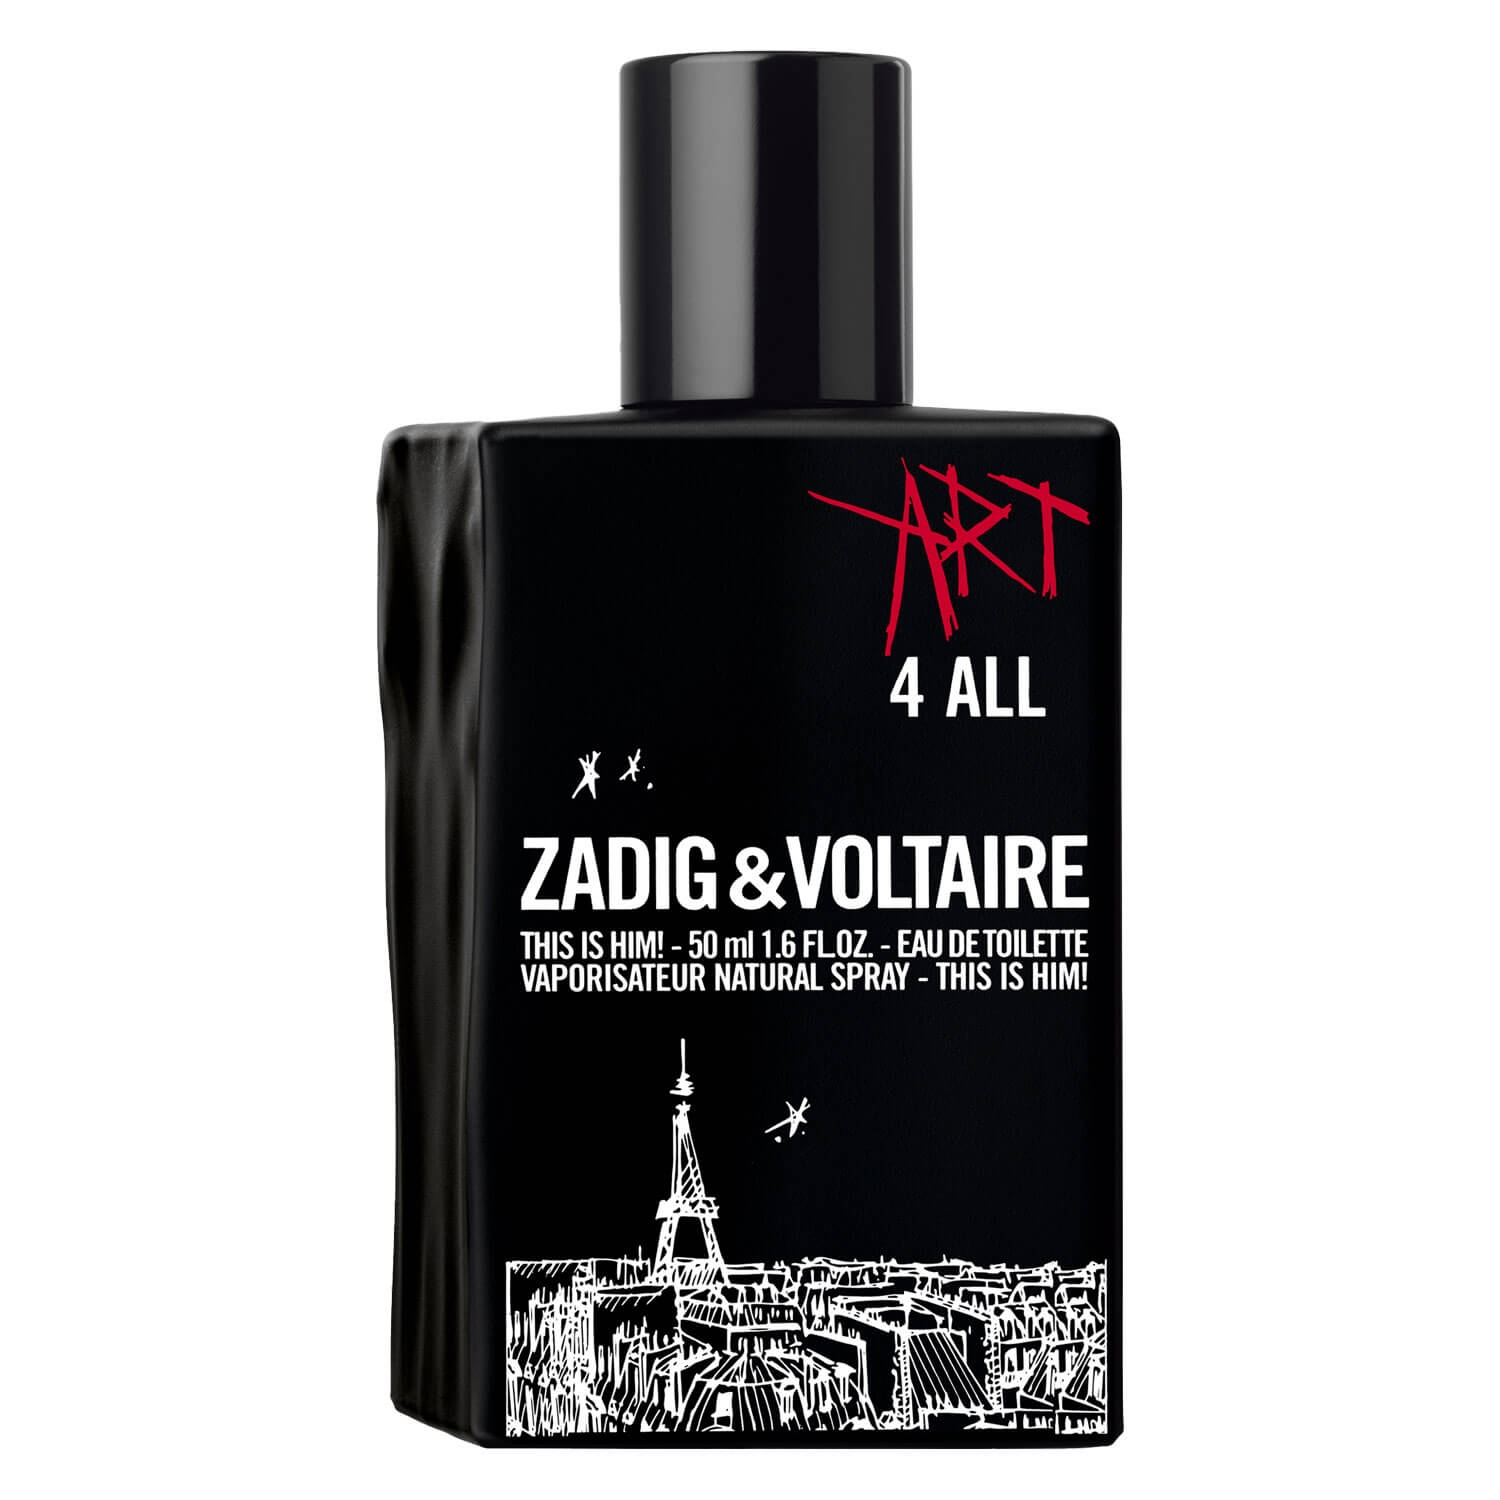 Product image from This is Him! - Art 4 All Eau de Toilette